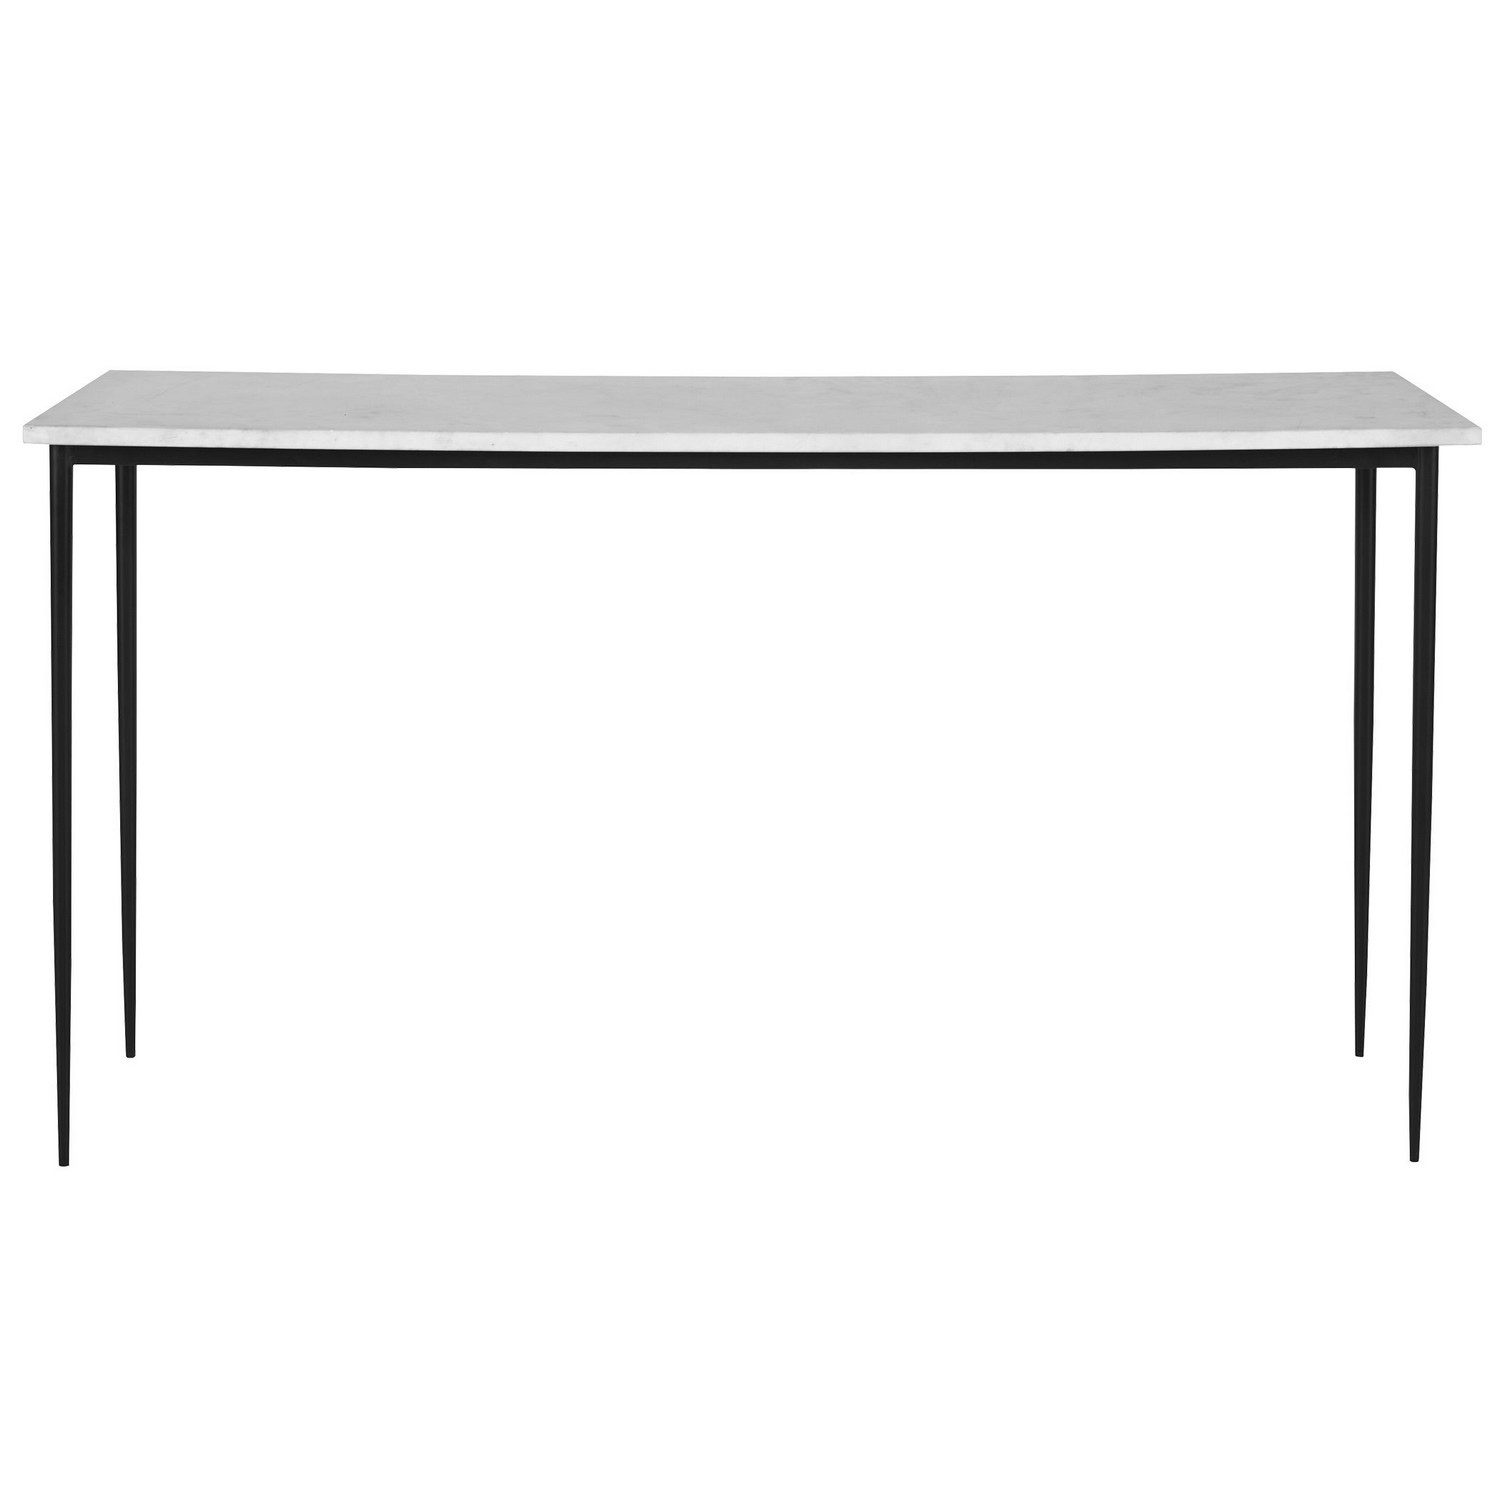 Uttermost Nightfall Console Table - White Marble